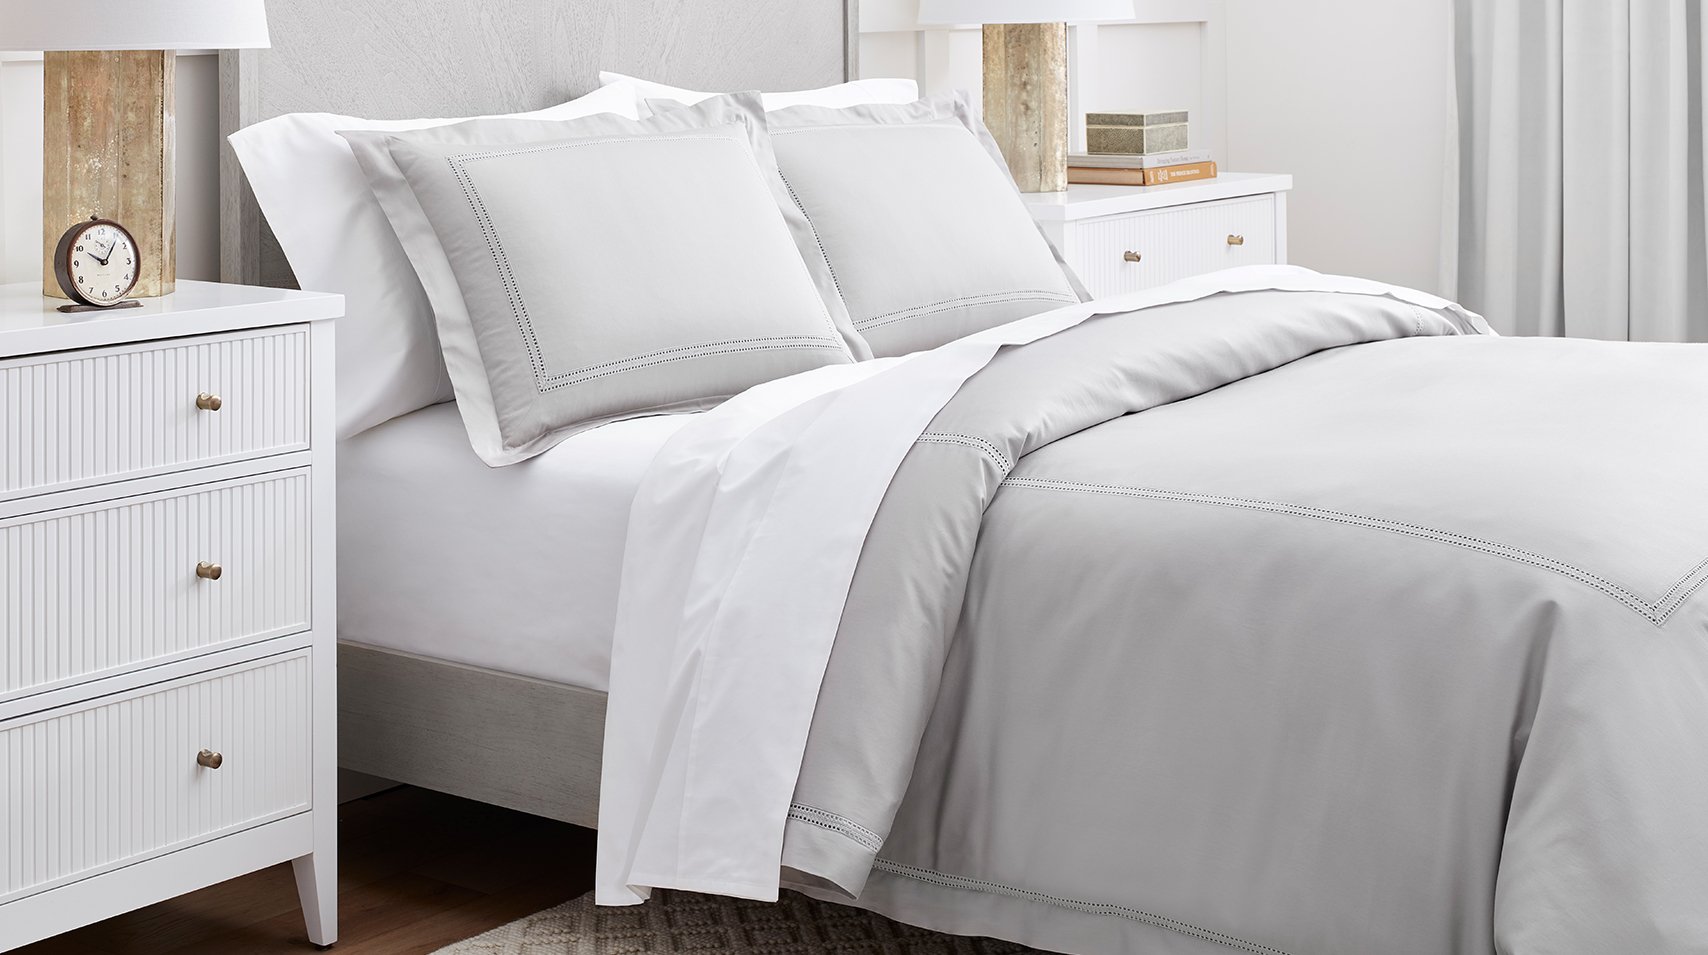 Shop Duvet Cover Sets Compare With Comforters Boll Branch